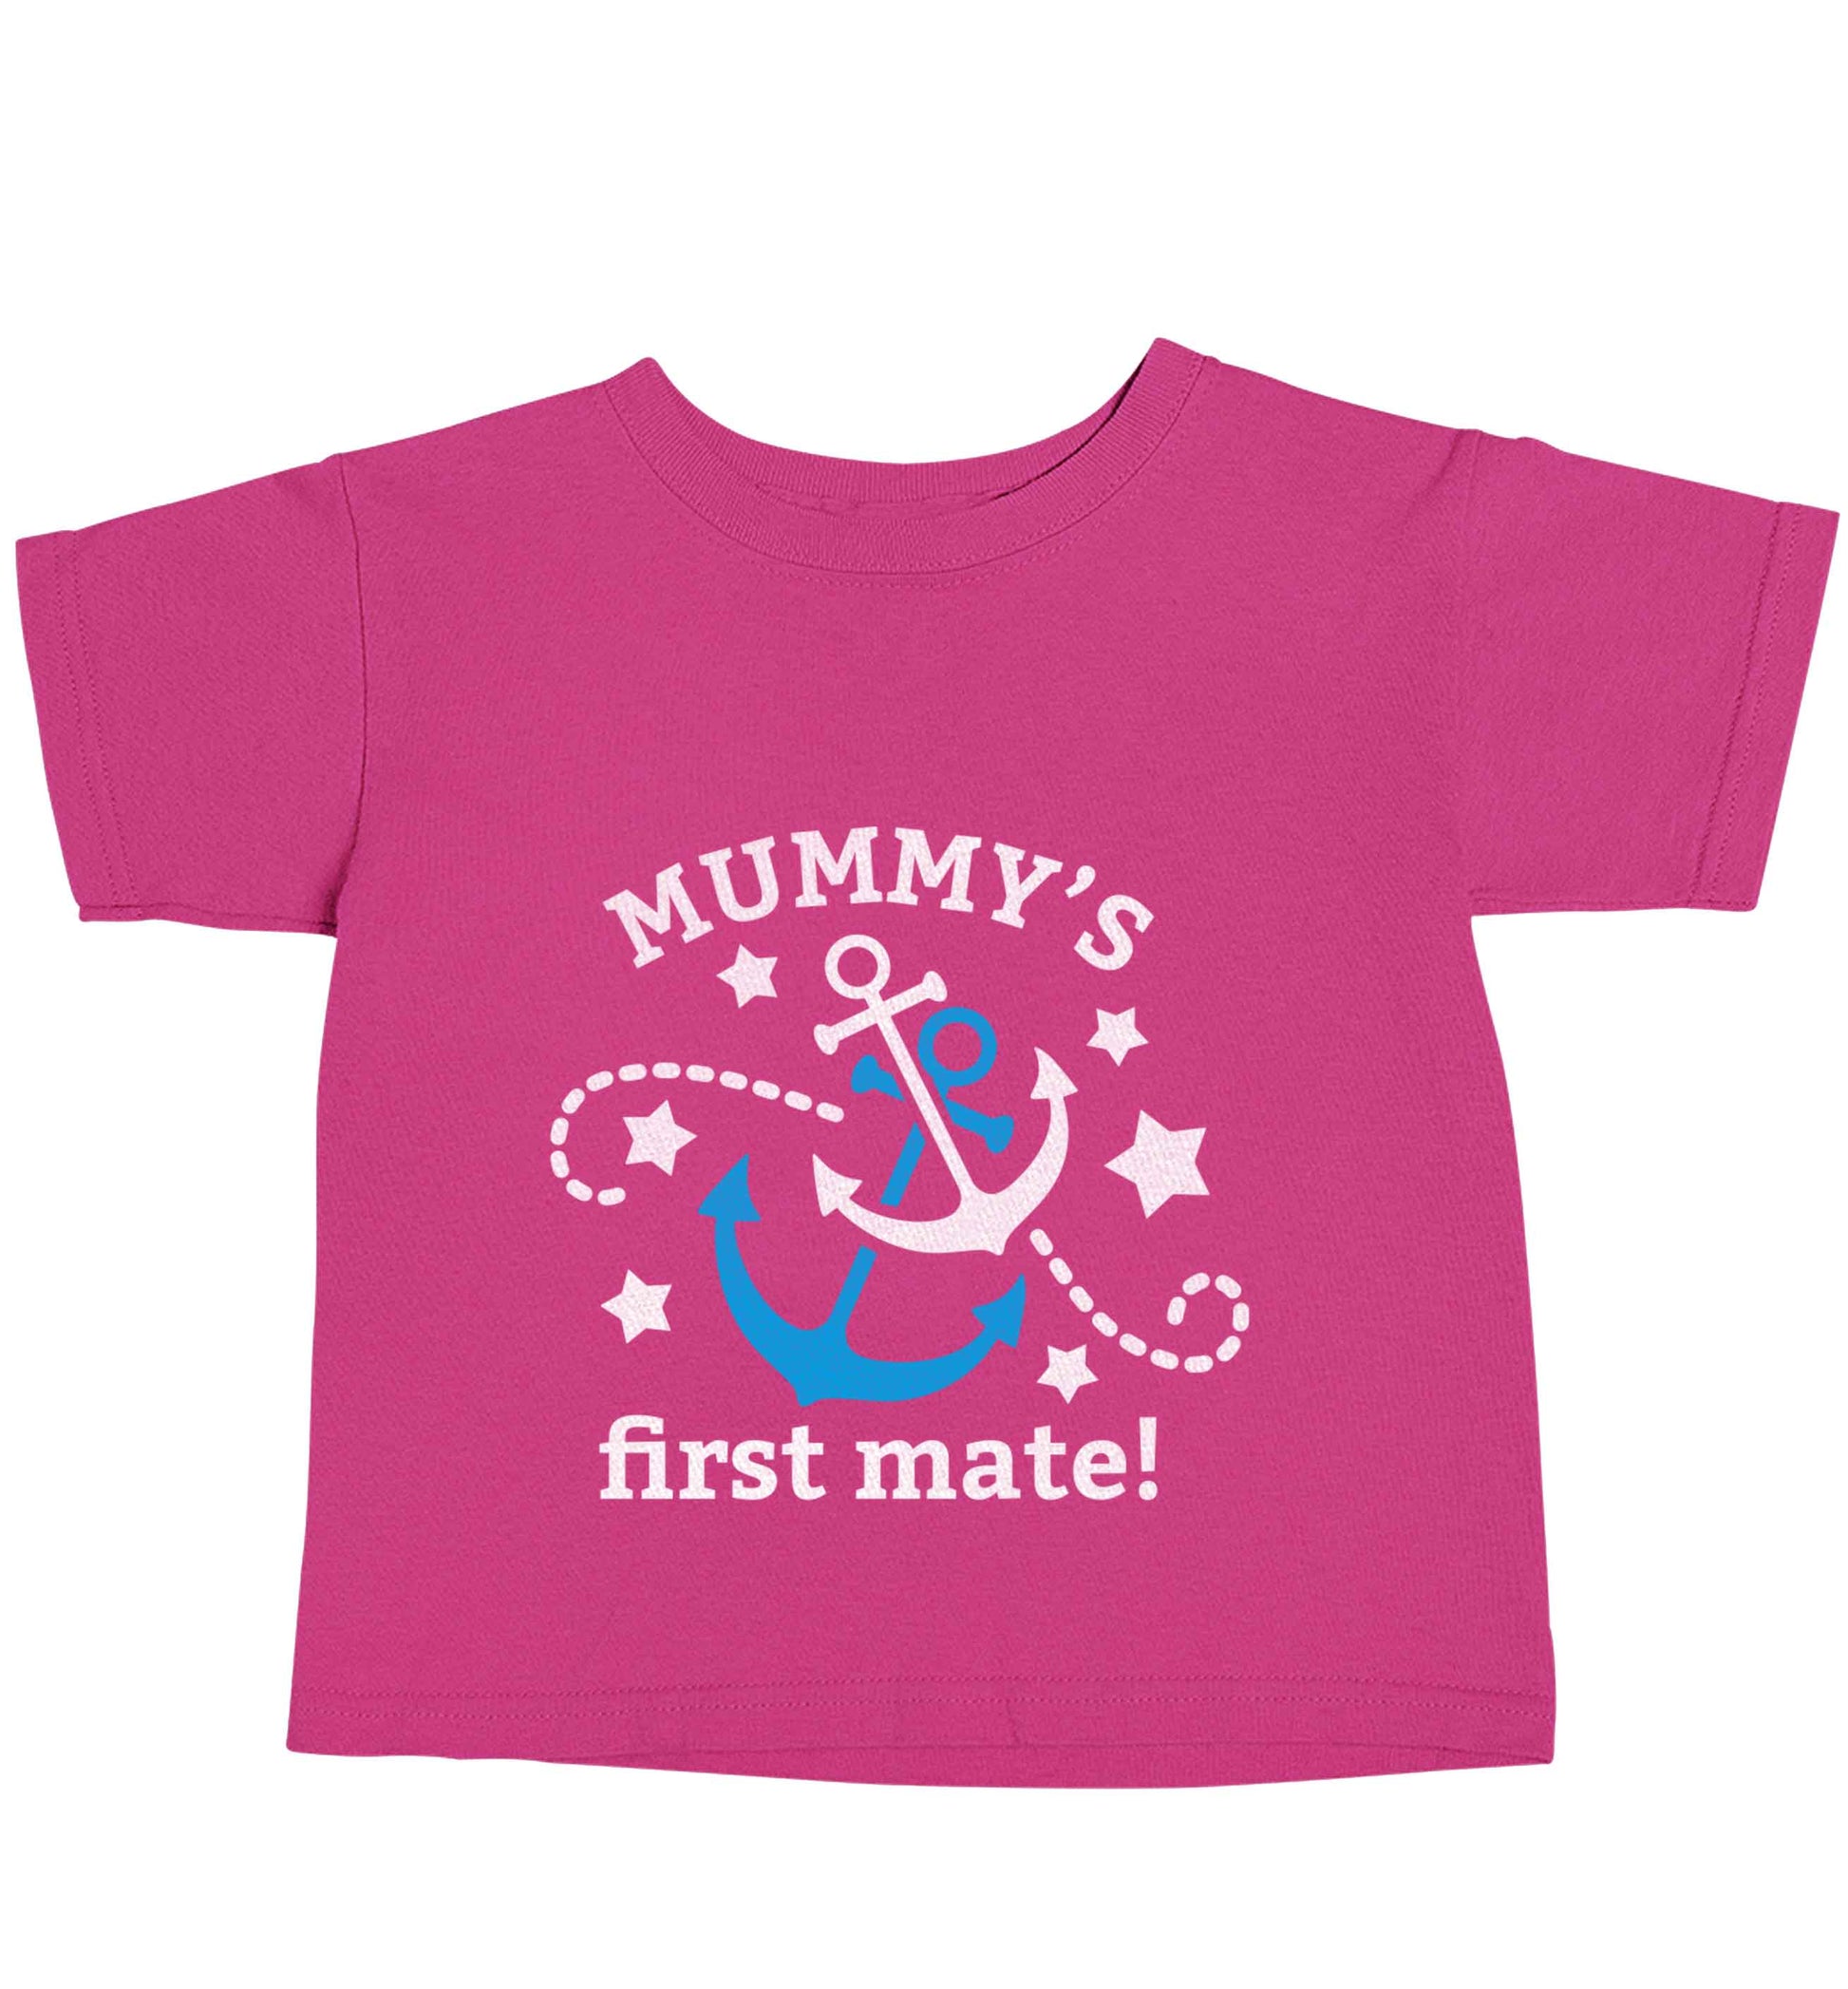 Mummy's First Mate pink baby toddler Tshirt 2 Years